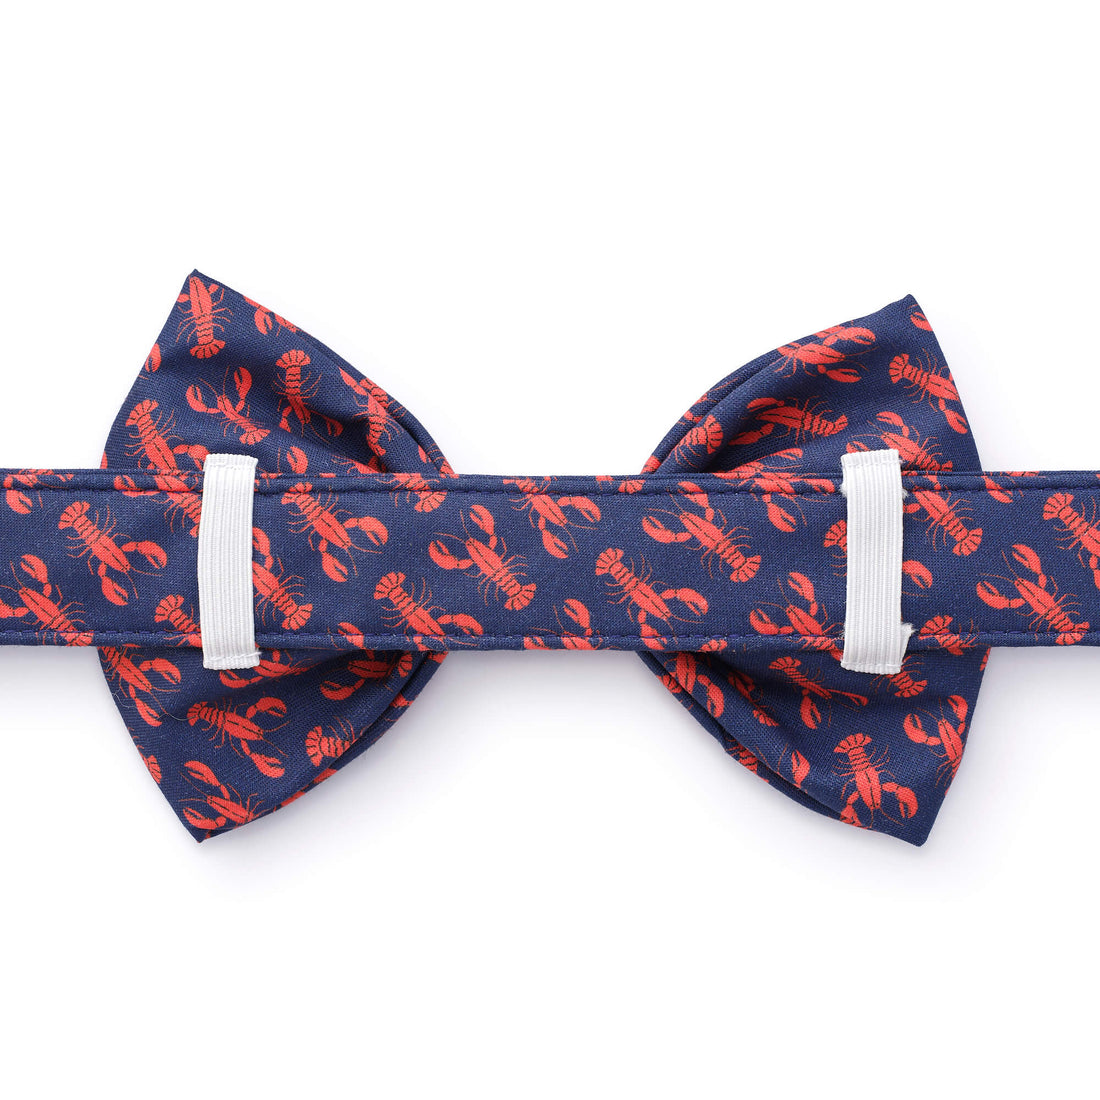 Catch of the Day Bow Tie Collar – The Foggy Dog